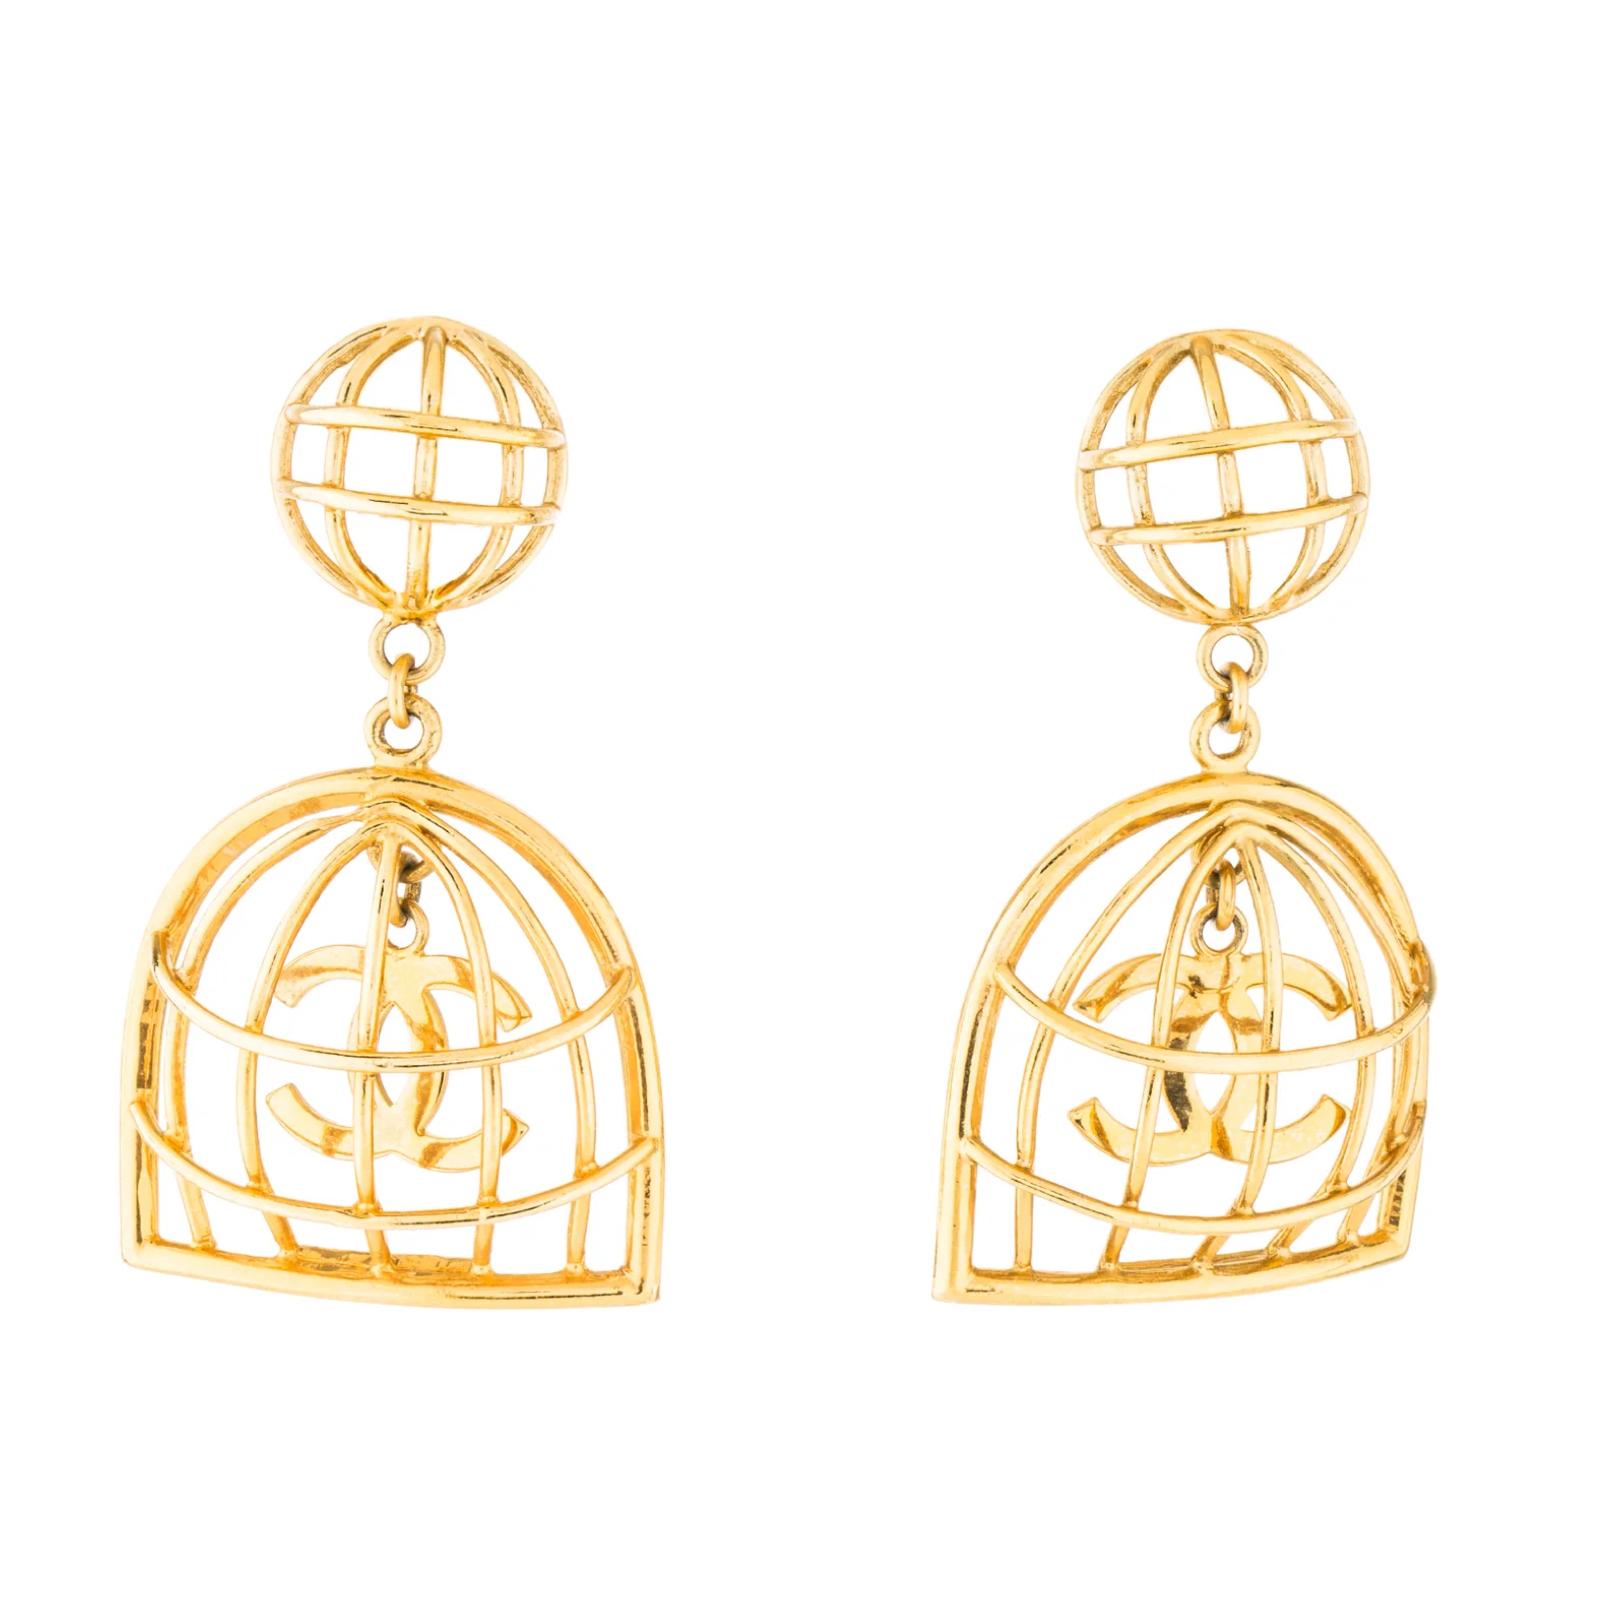 Chanel Birdcage Clip on Earrings 1993 collection vintage repaired